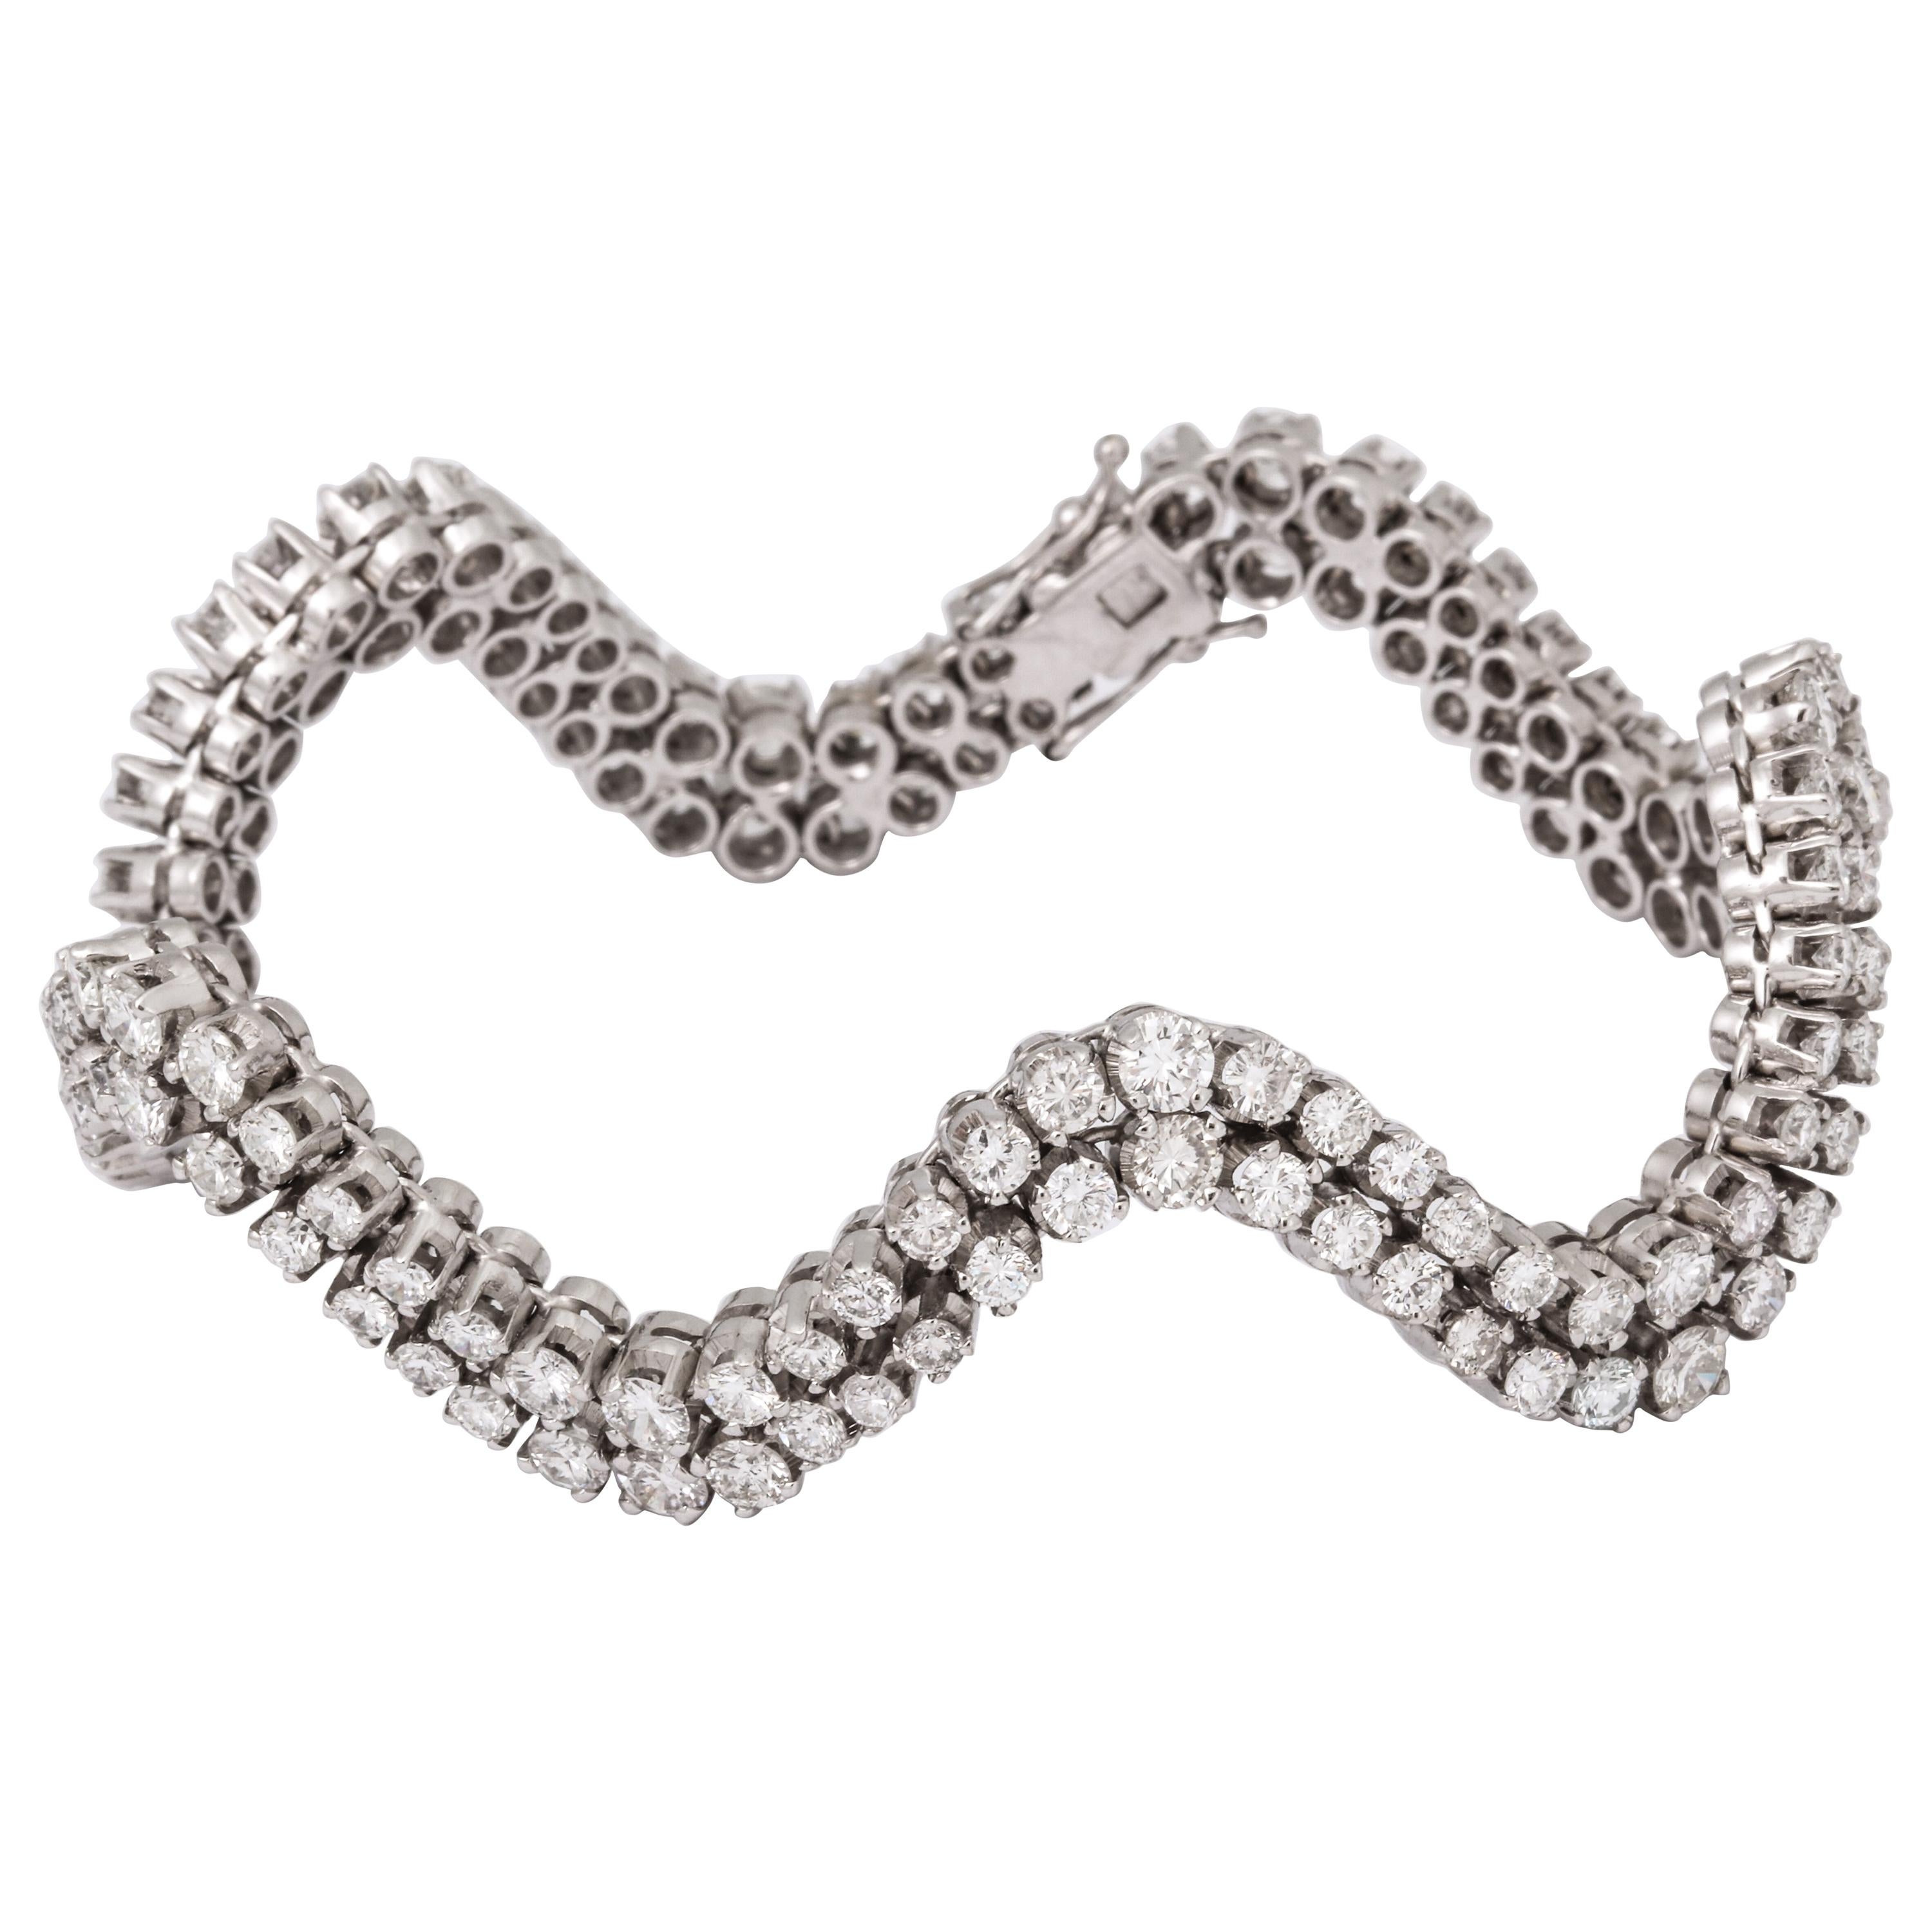 This is a very stunning diamond bracelet with incredible design. It is comprised of 14.5 carats of fine quality diamonds set in 18K white gold.